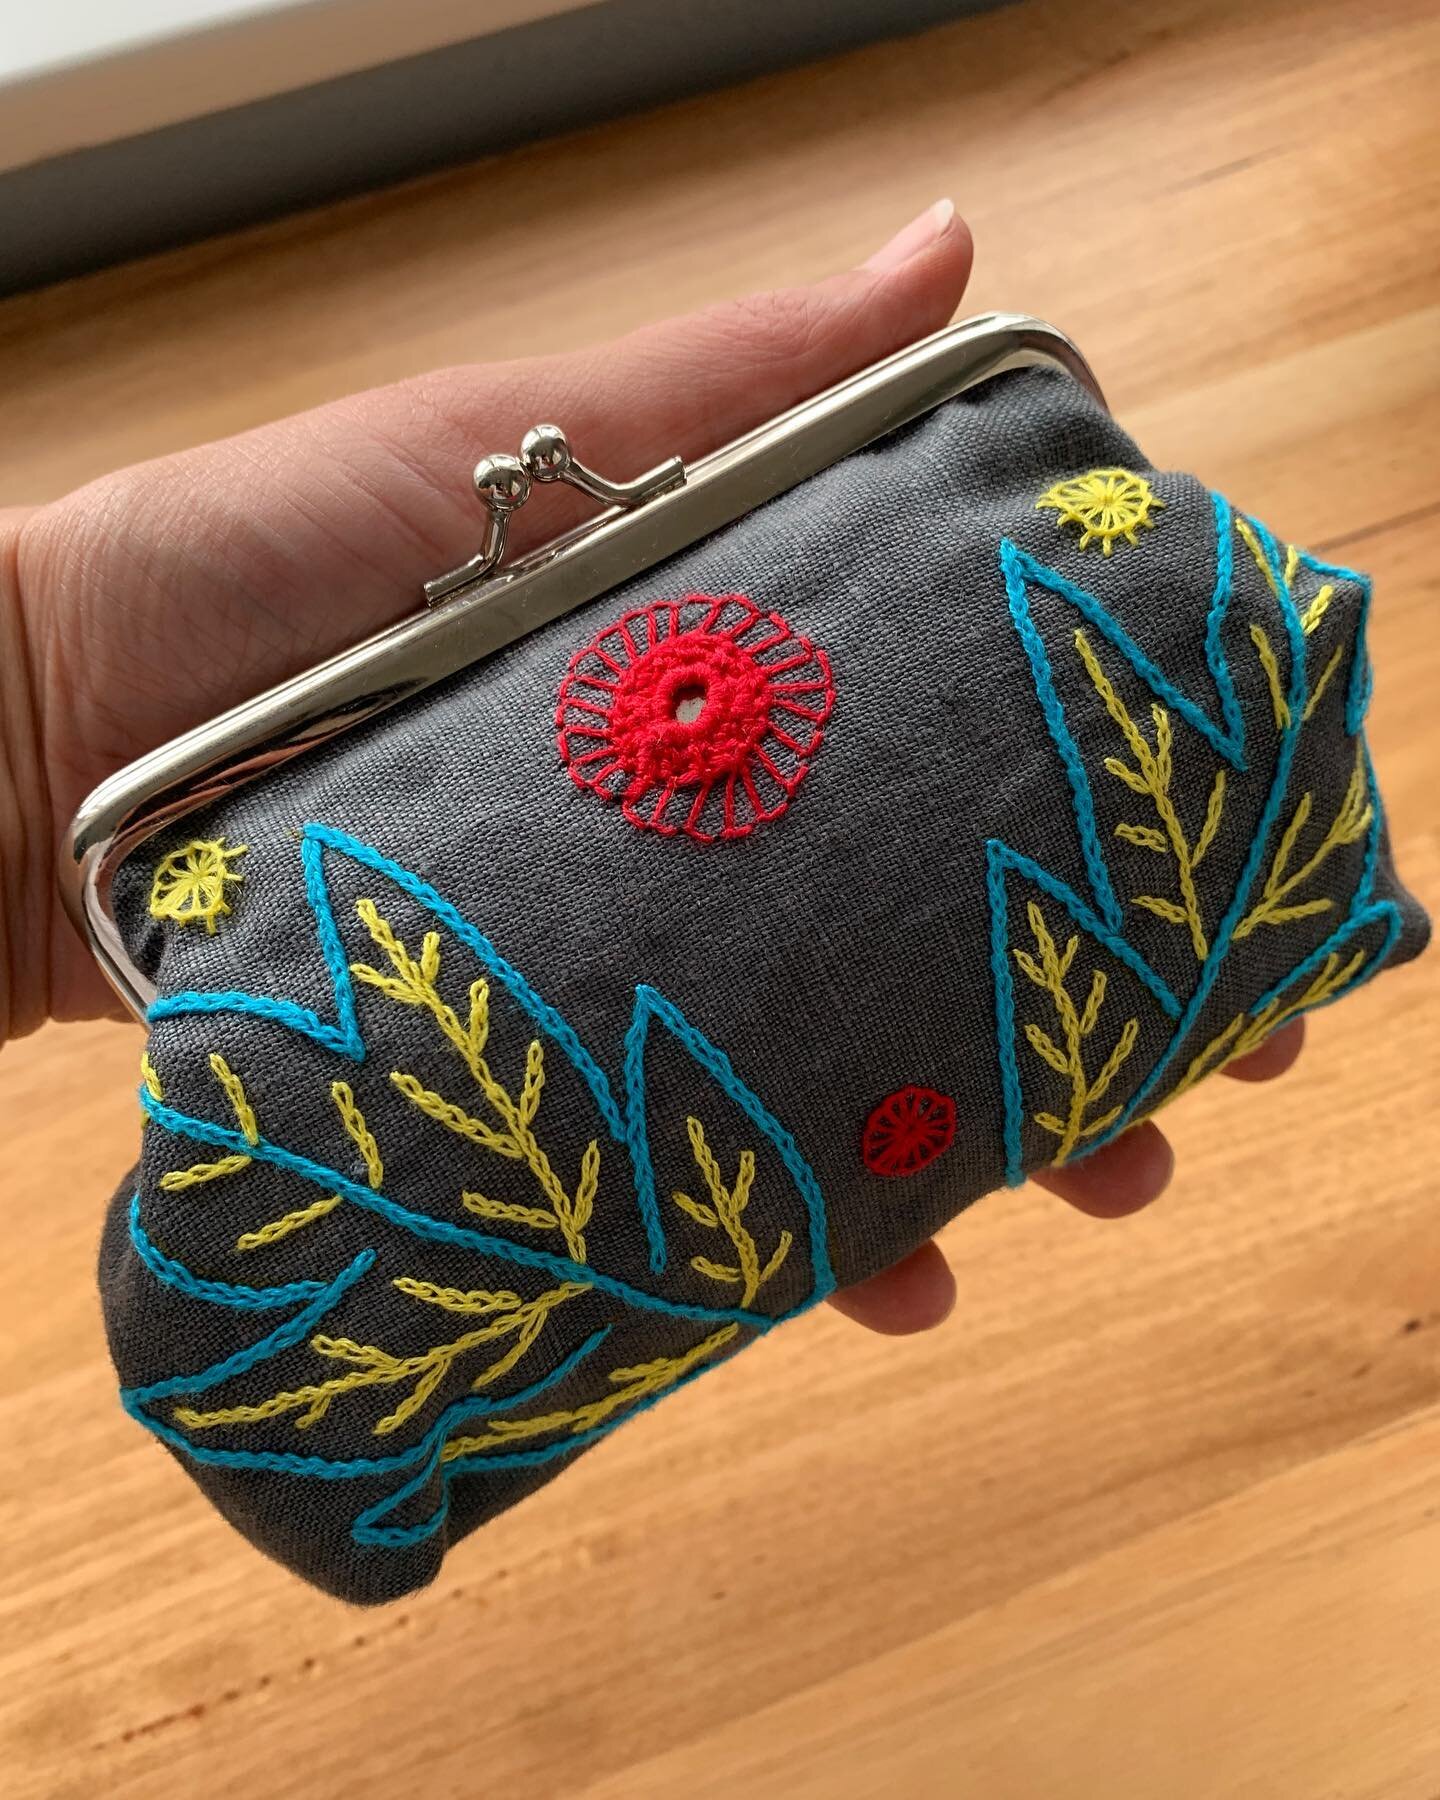 Small grey coin purse with colourful embellishments. This delightful coin purse has been made with vintage fabric. 

$15 + postage.

To purchase an item, please comment below or send us a DM. 

***

We will be posting items to purchase over the next 